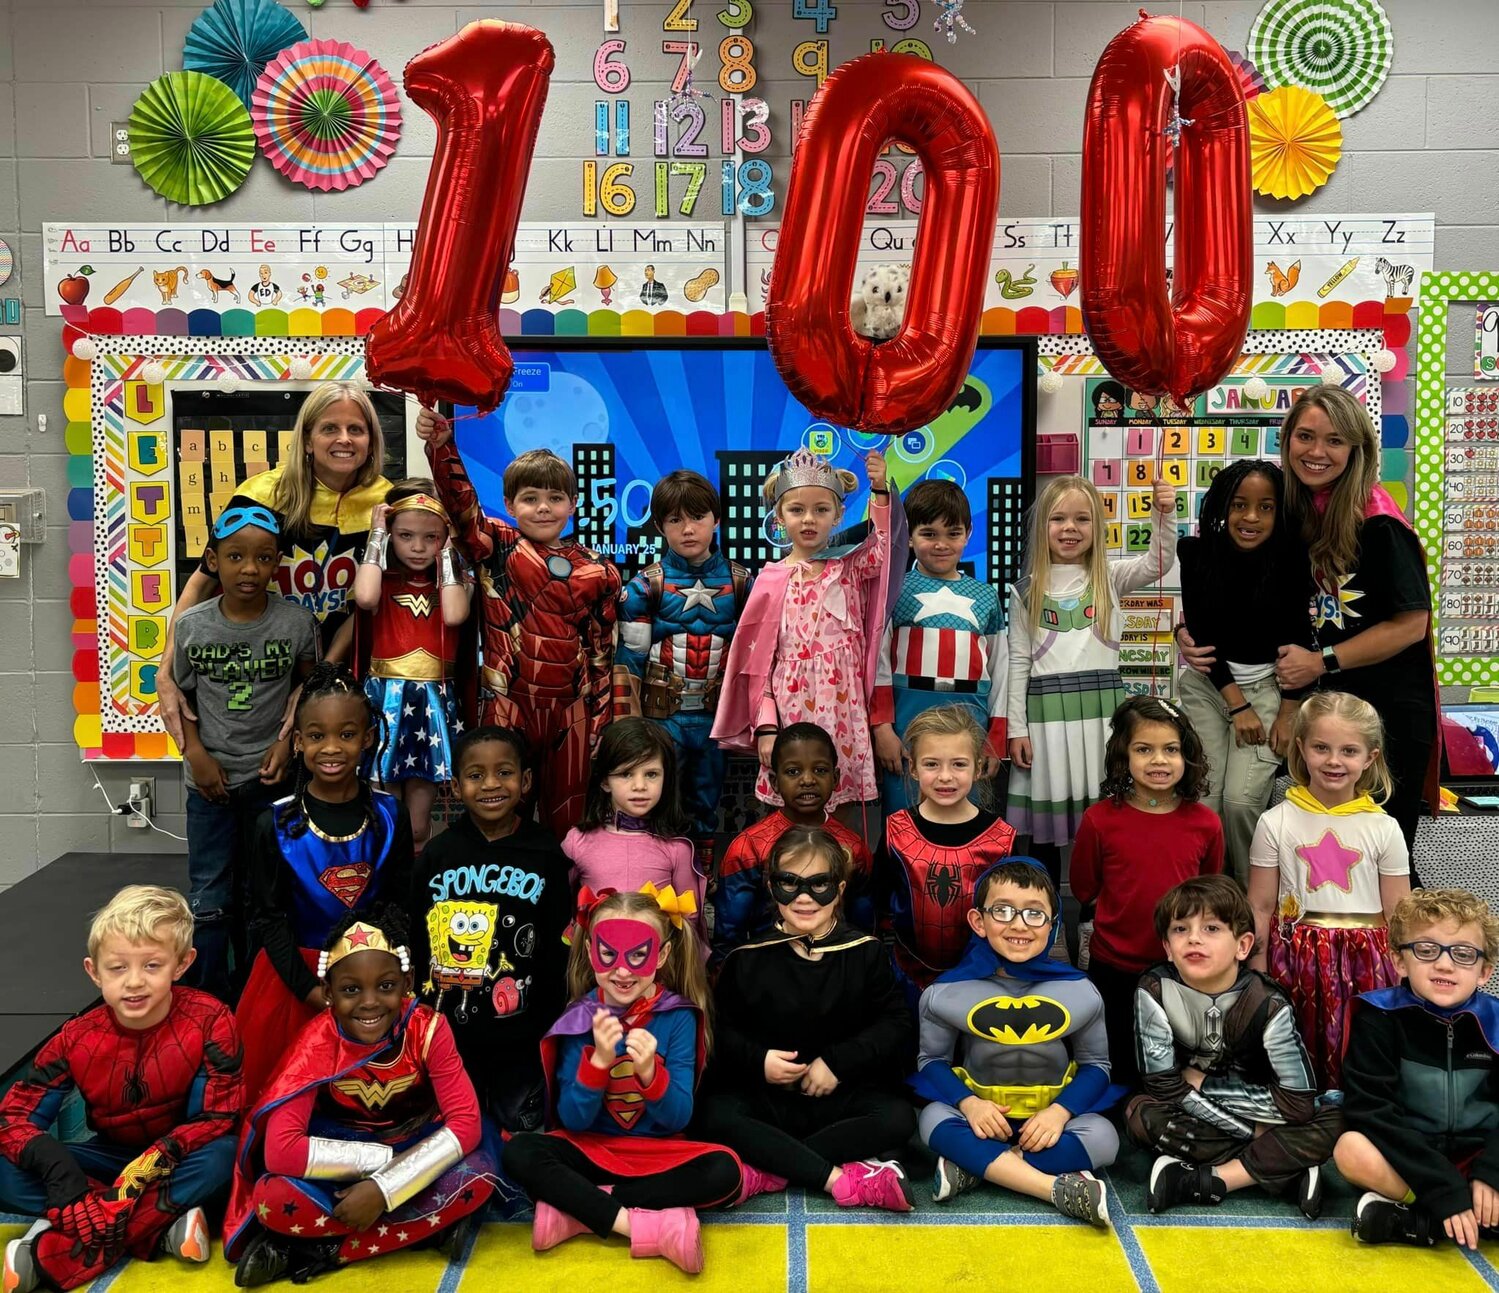 Mrs. Adcock’s kindergarten class celebrates the 100th day of school.